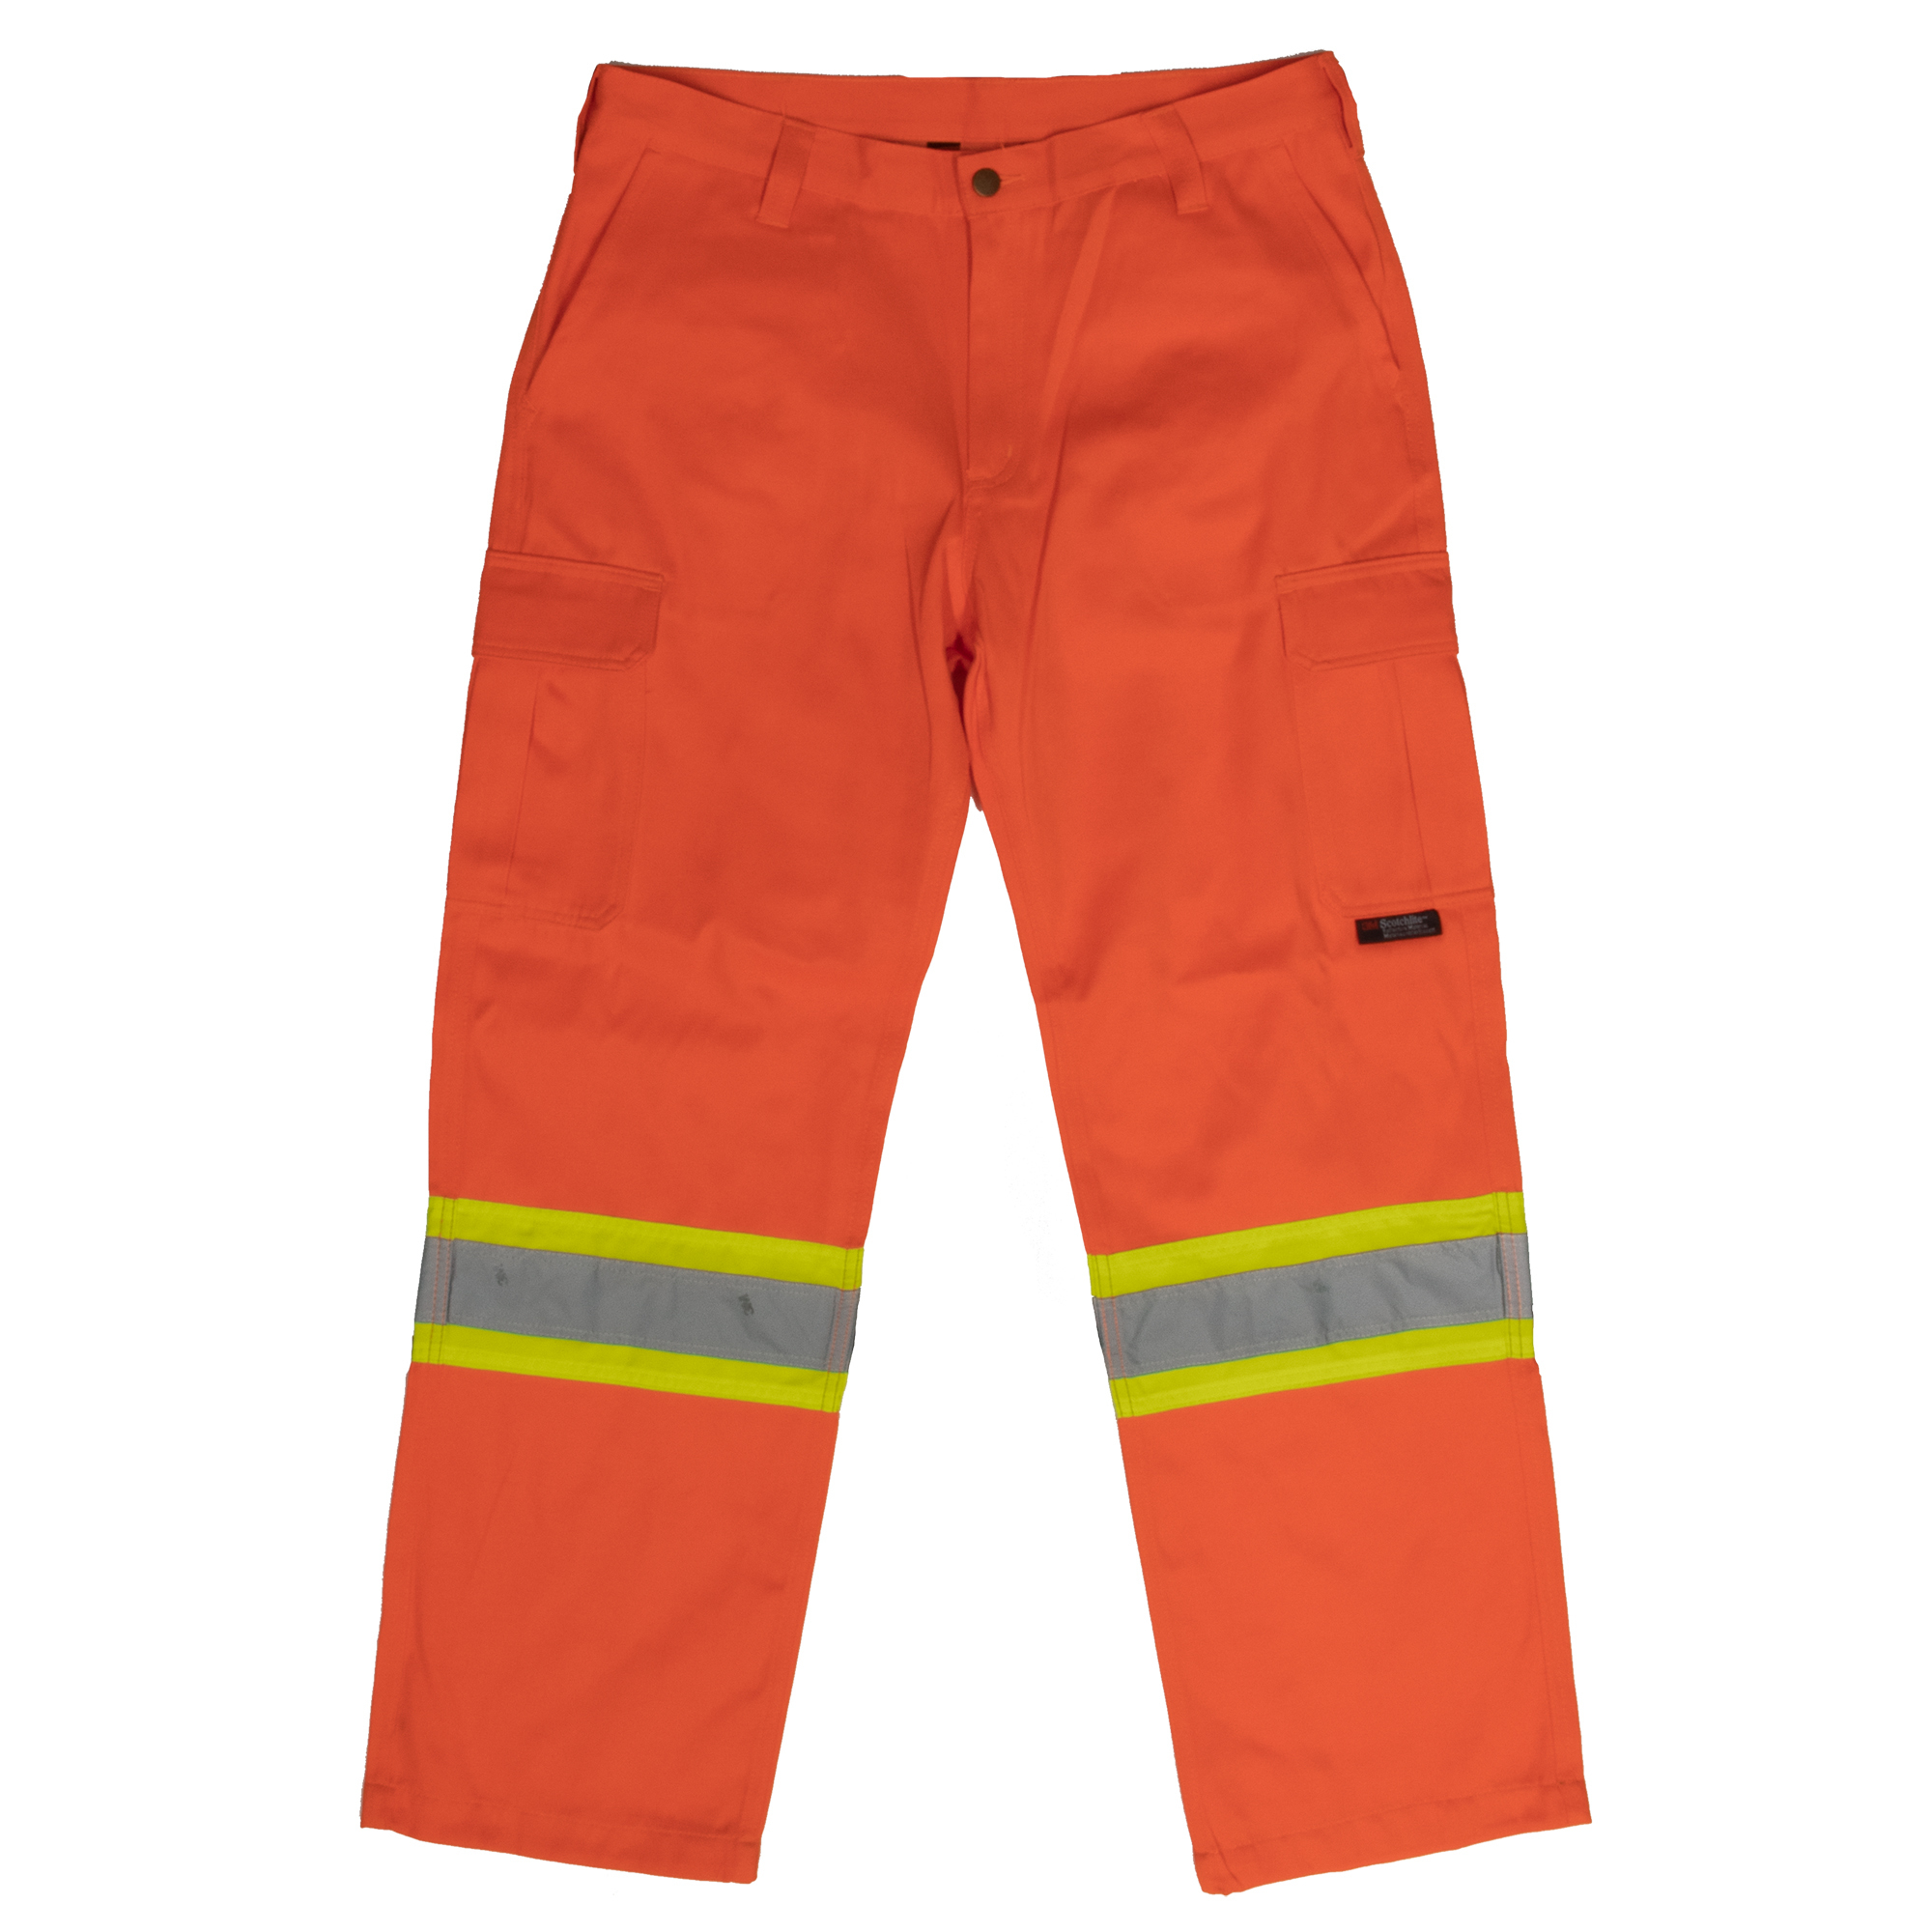 Tough Duck, Safety Cargo Work Pant, Waist 30 in, Inseam 30 in, Color Fluorescent Orange, Model SP010